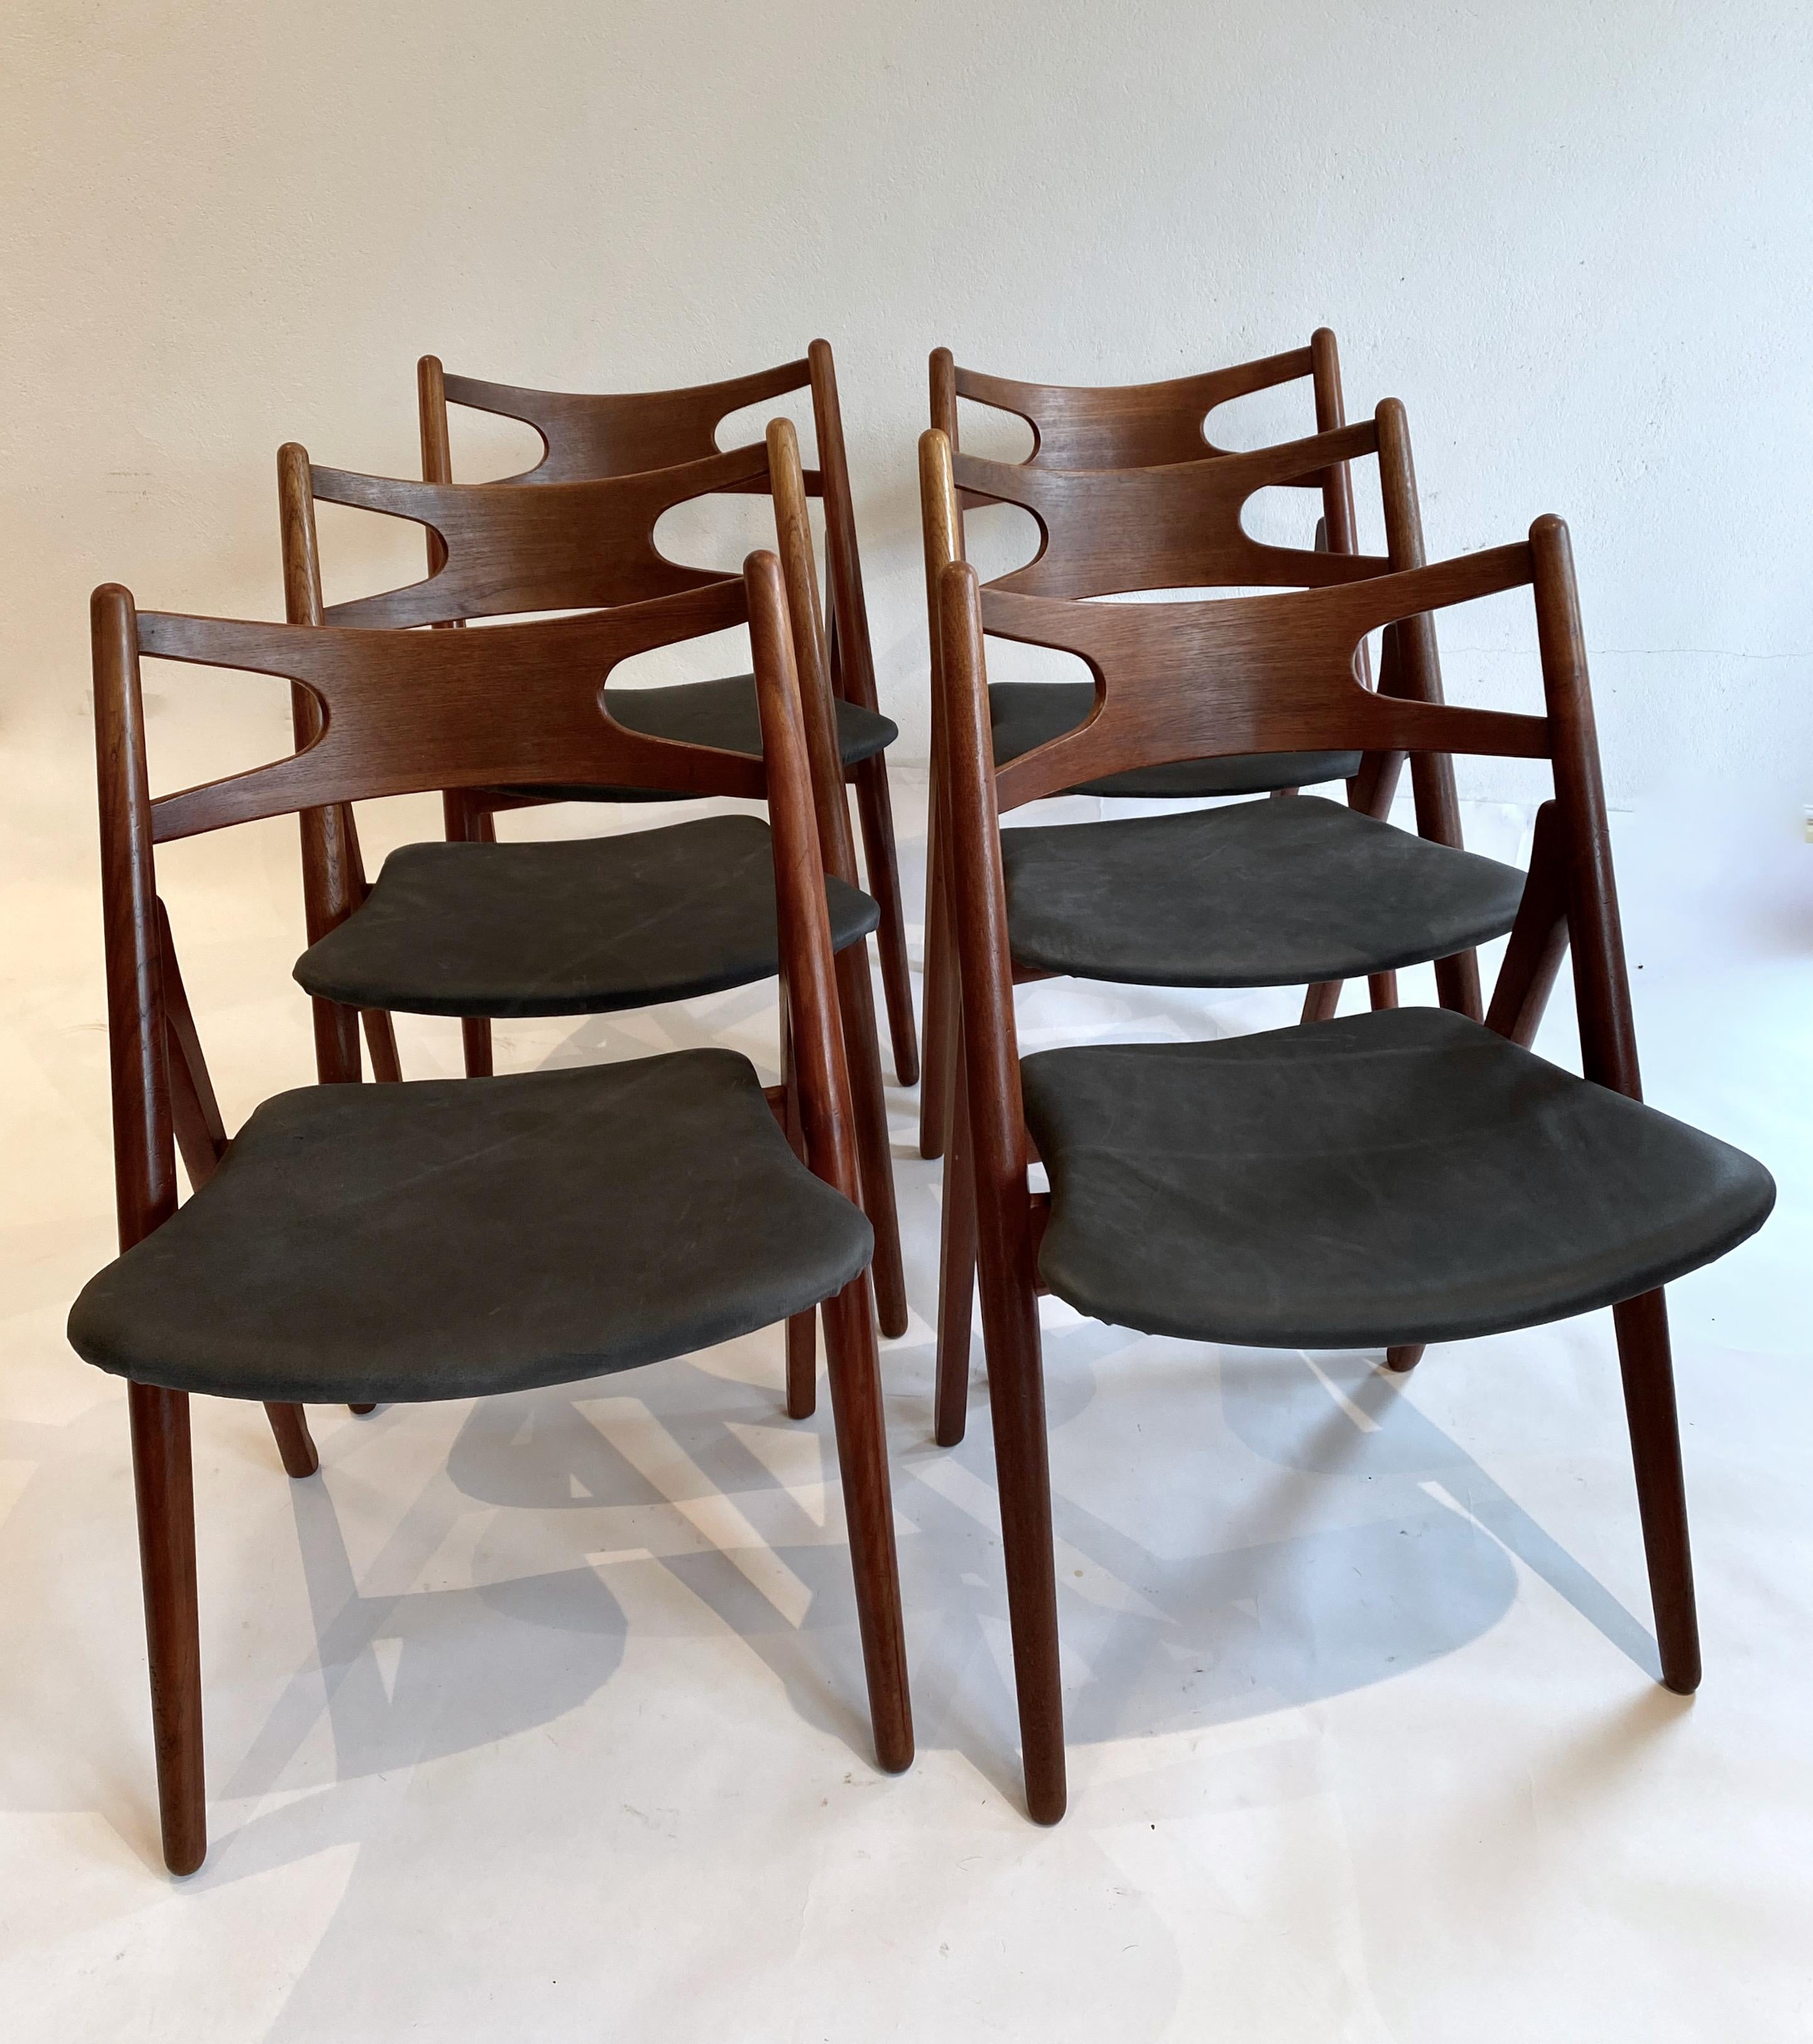 Set of 6 dining chairs, model CH-29, also called Sawhorse chair. Designed in 1952 by Hans Wegner and manufactured by Carl Hansen in Odense, Denmark. Early set from the 50`s totally in massive teak which is highly unusual.
All chairs newly